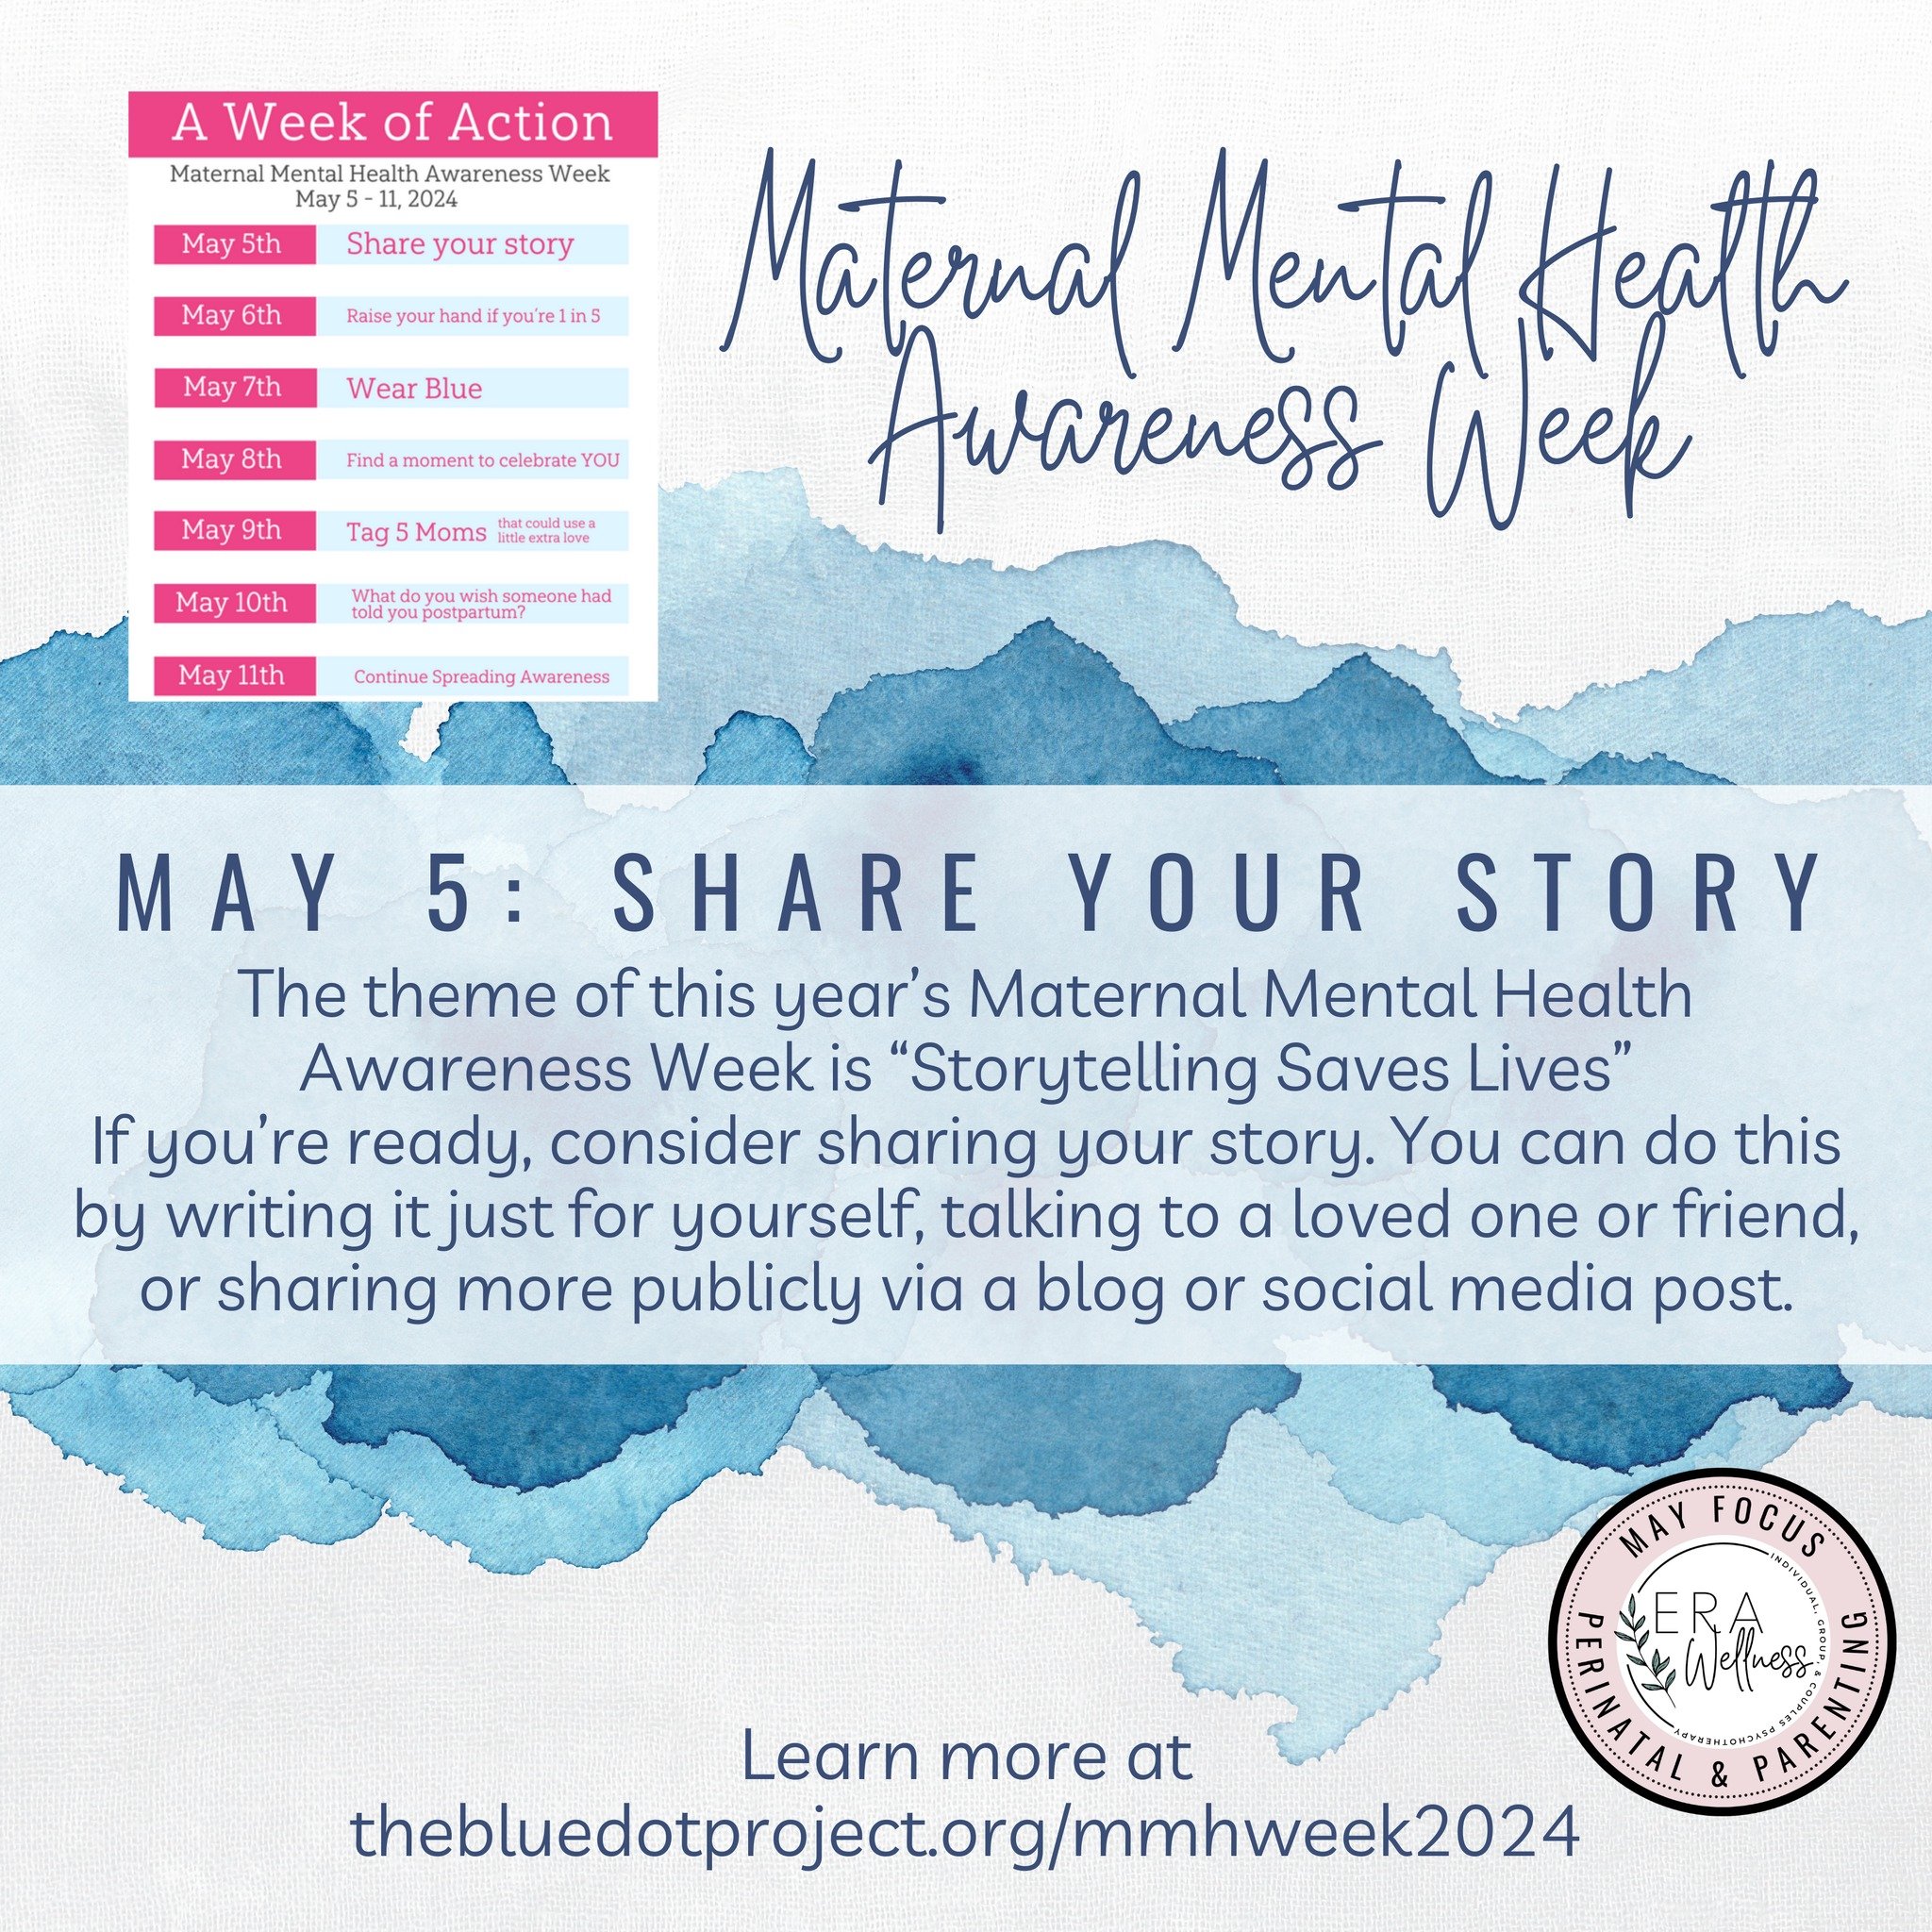 💙 Maternal Mental Health Week 2024 - Storytelling Saves Lives 💙

Sunday, May 5: Share Your Story

The theme of this year&rsquo;s Maternal Mental Health Awareness Week is &ldquo;Storytelling Saves Lives&rdquo;
If you&rsquo;re ready, consider sharing